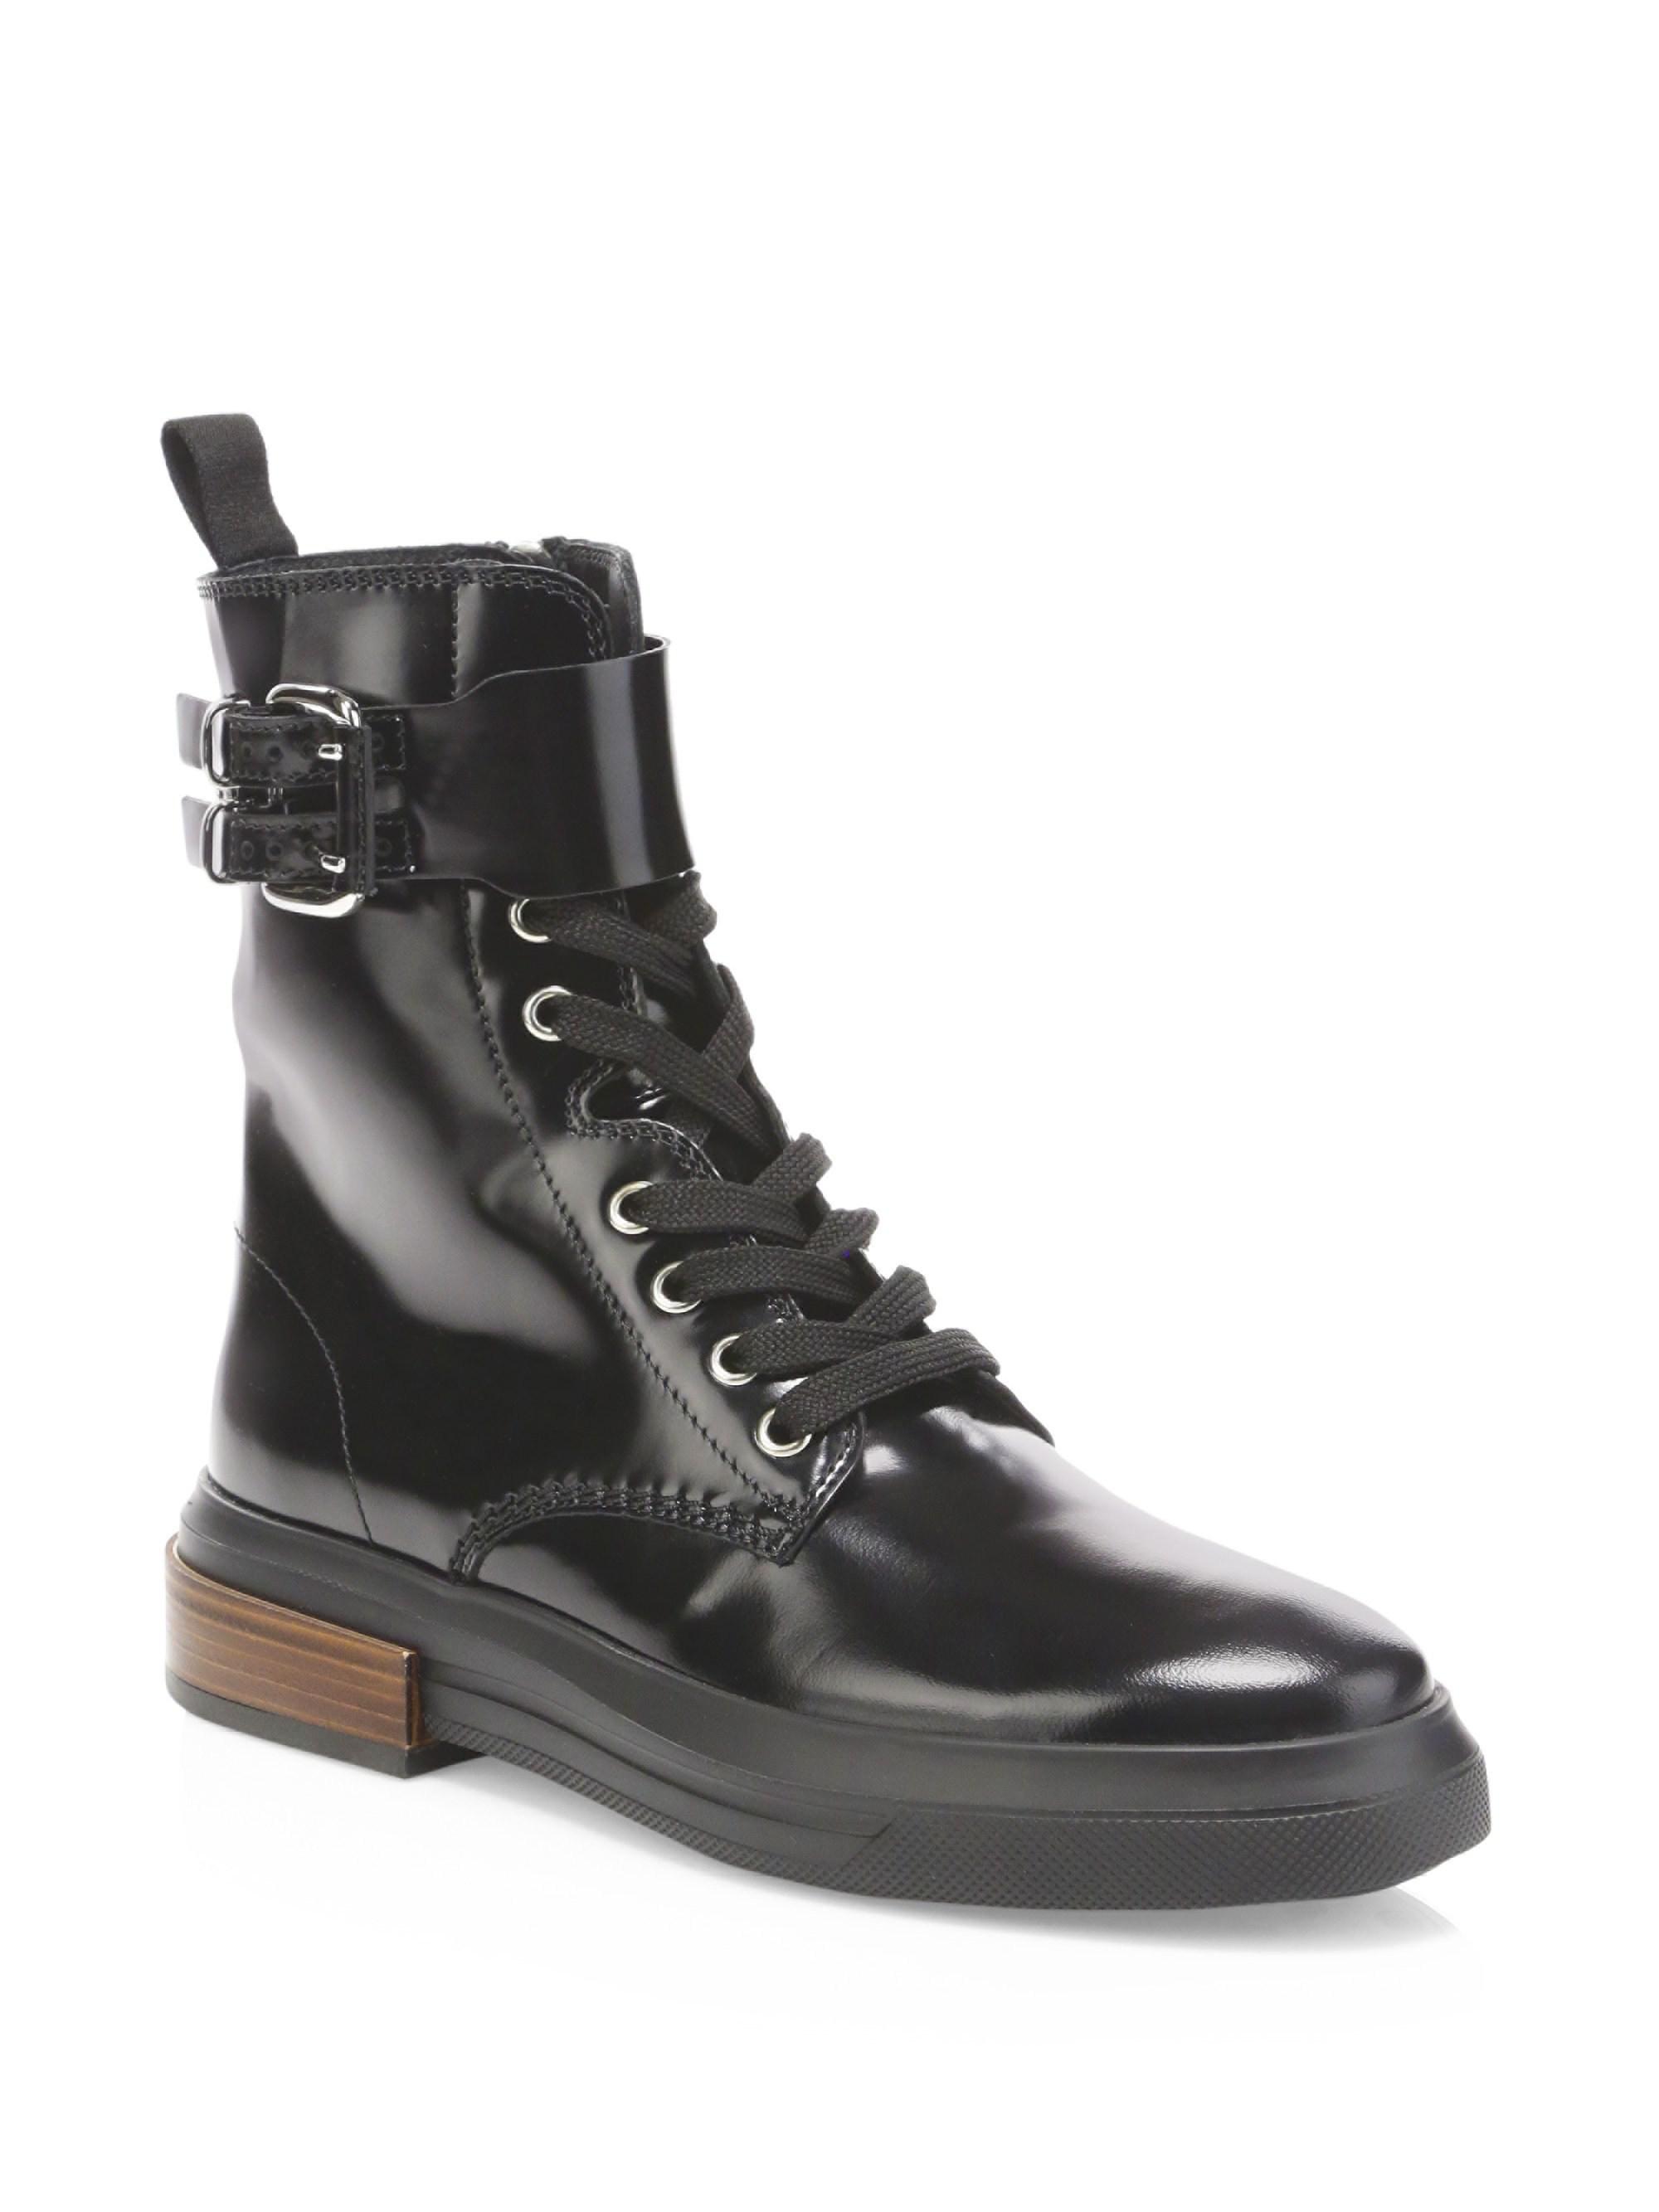 Tod's Gomma Buckle Leather Combat Boot in Black - Lyst